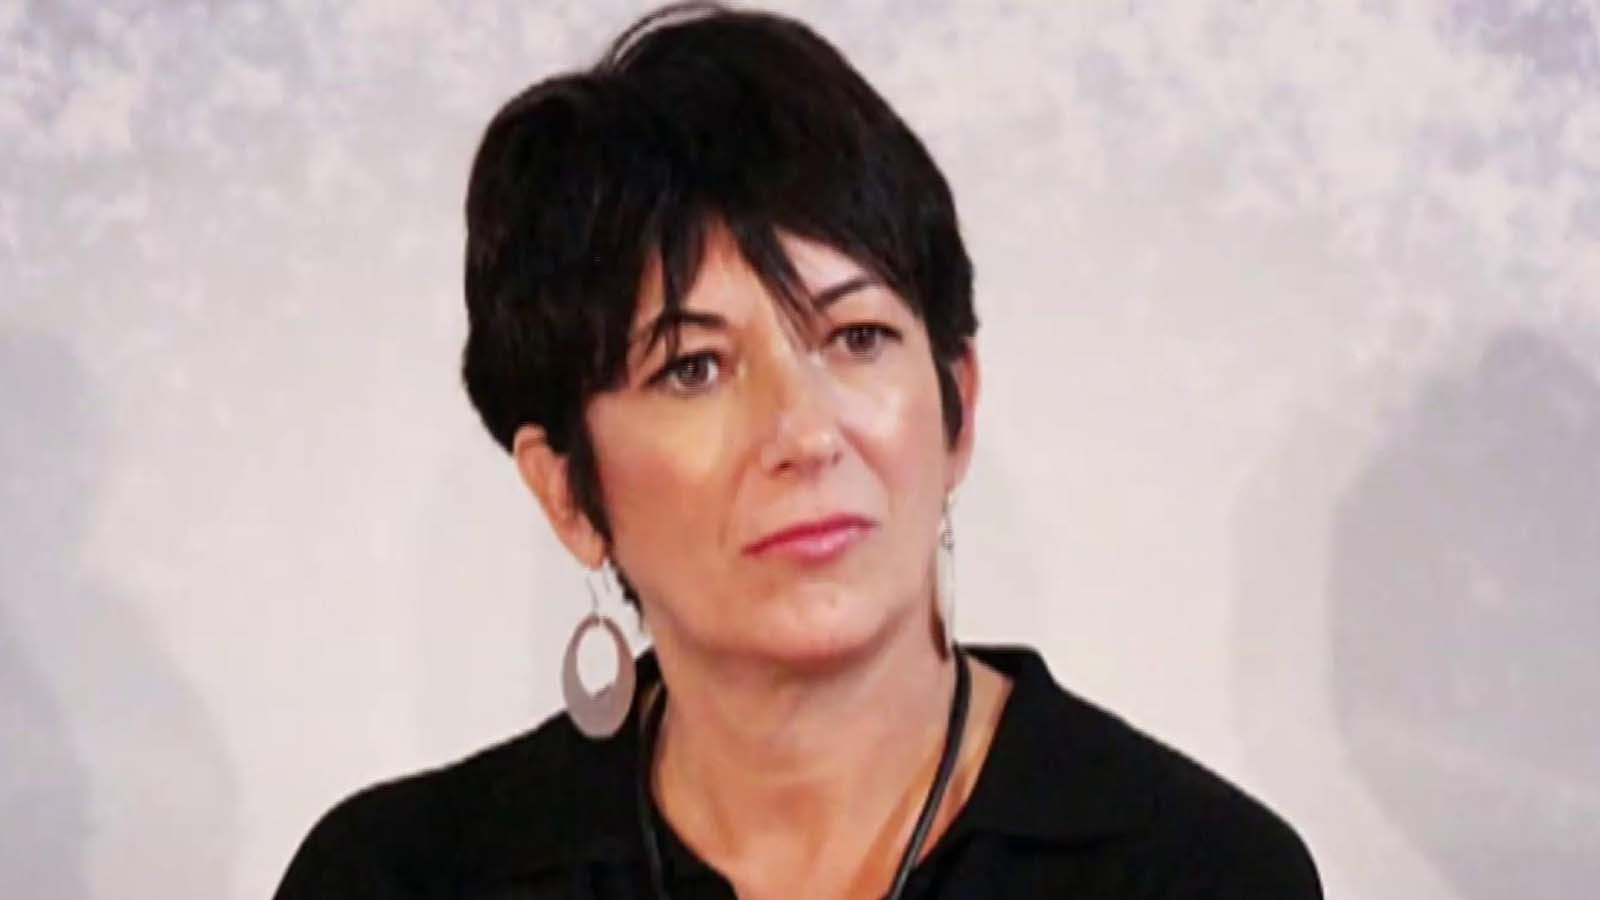 As part of her upcoming trial, Ghislaine Maxwell and her legal team want to be able to name her victims. Should she be allowed to though?